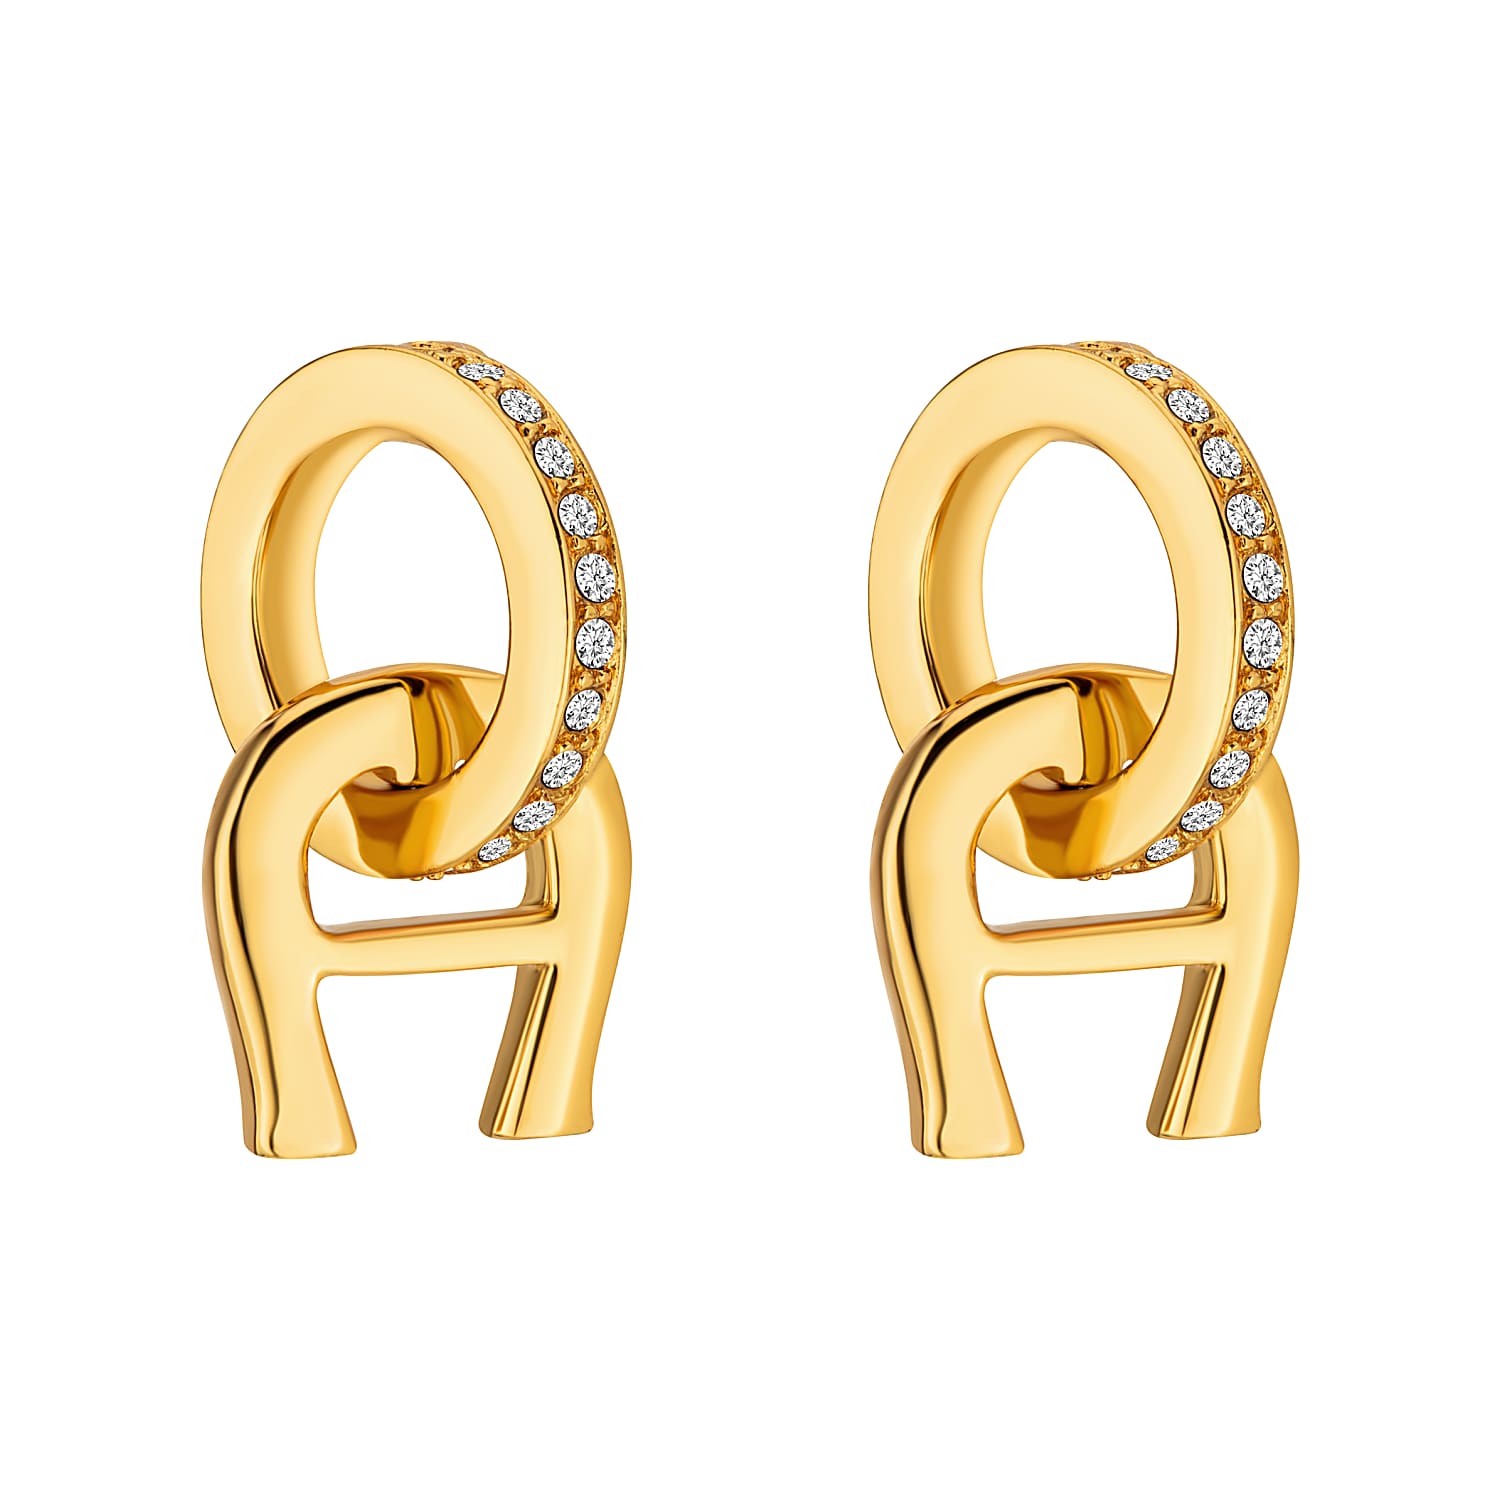 Earrings with A-logo and crystals